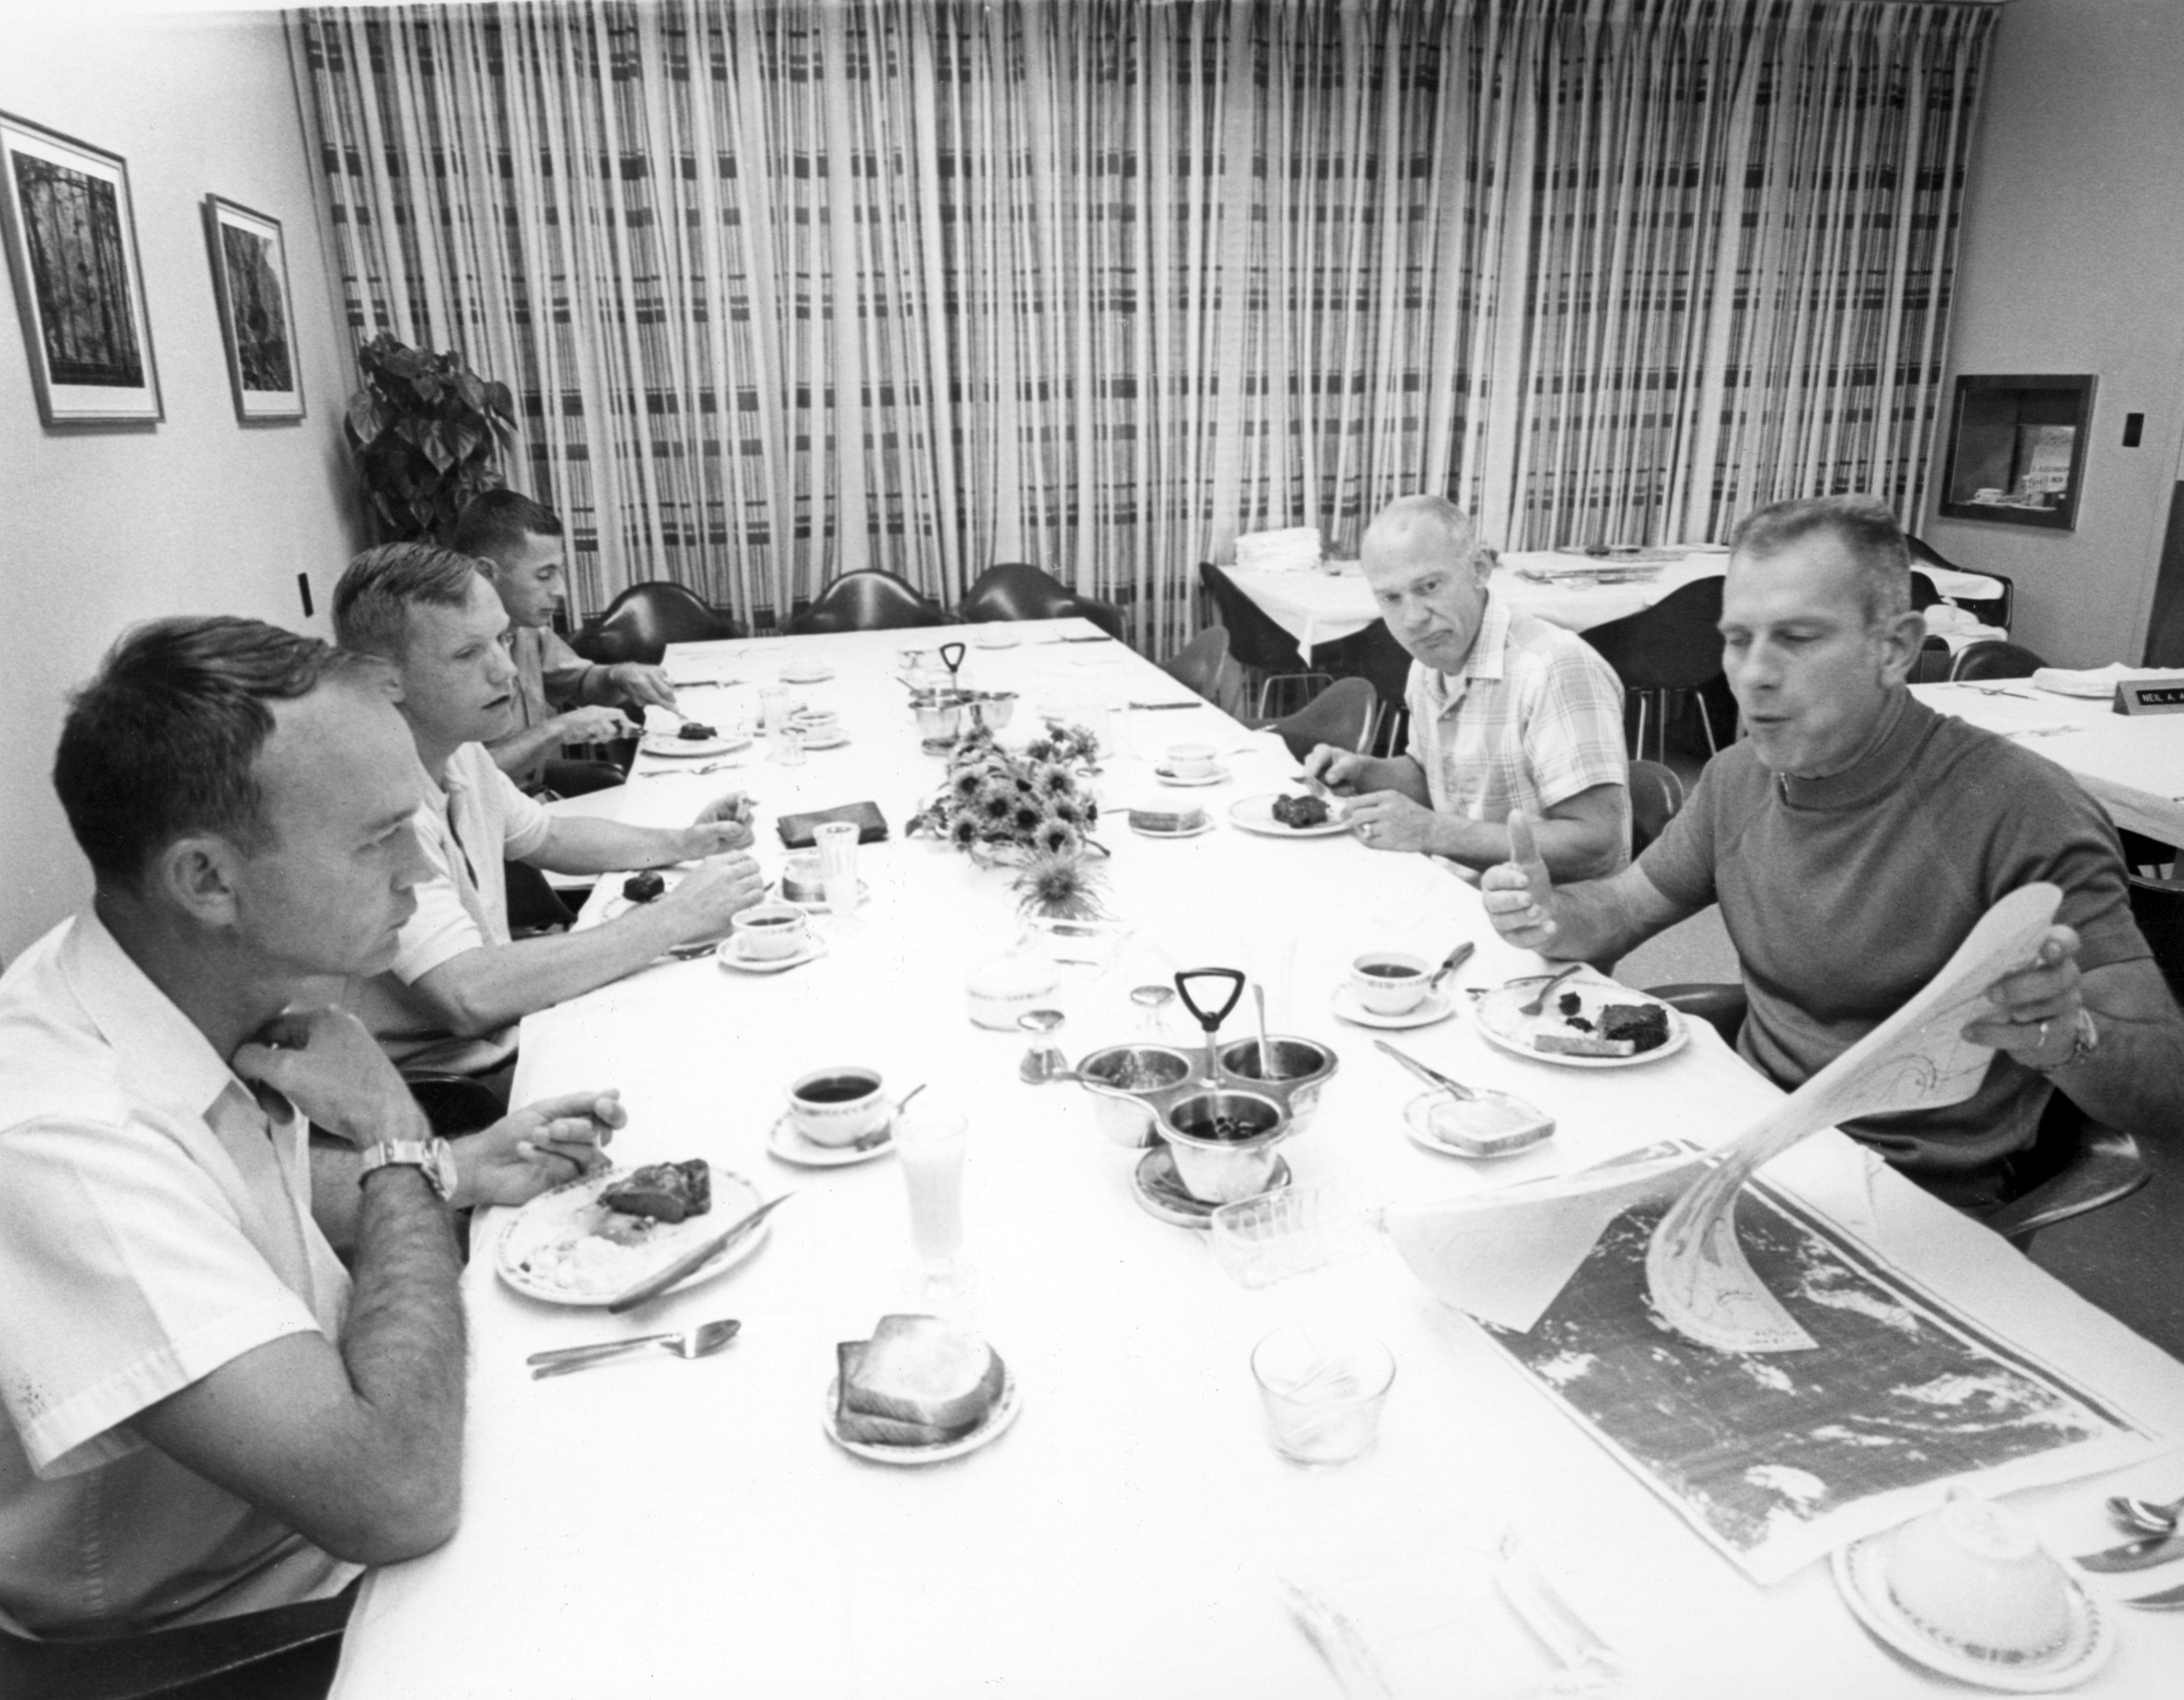 The crew of Apollo 11 enjoy the traditional steak and egg breakfast before departing for the moon, July 16 1969